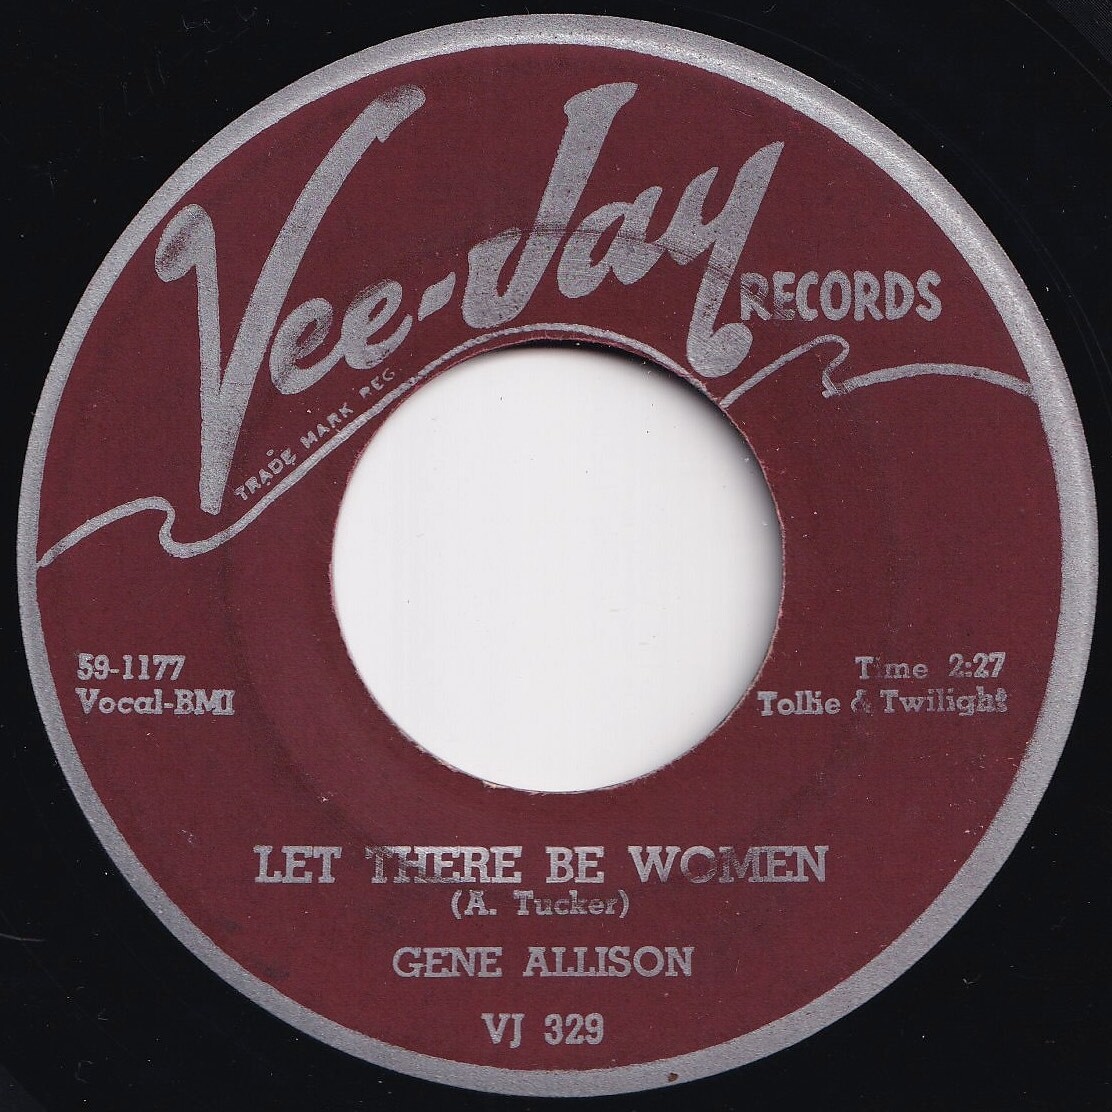 Gene Allison Let There Be Women / I'll Be Waiting For You Vee Jay US VJ 329 206181 R&B R&R レコード 7インチ 45_画像1